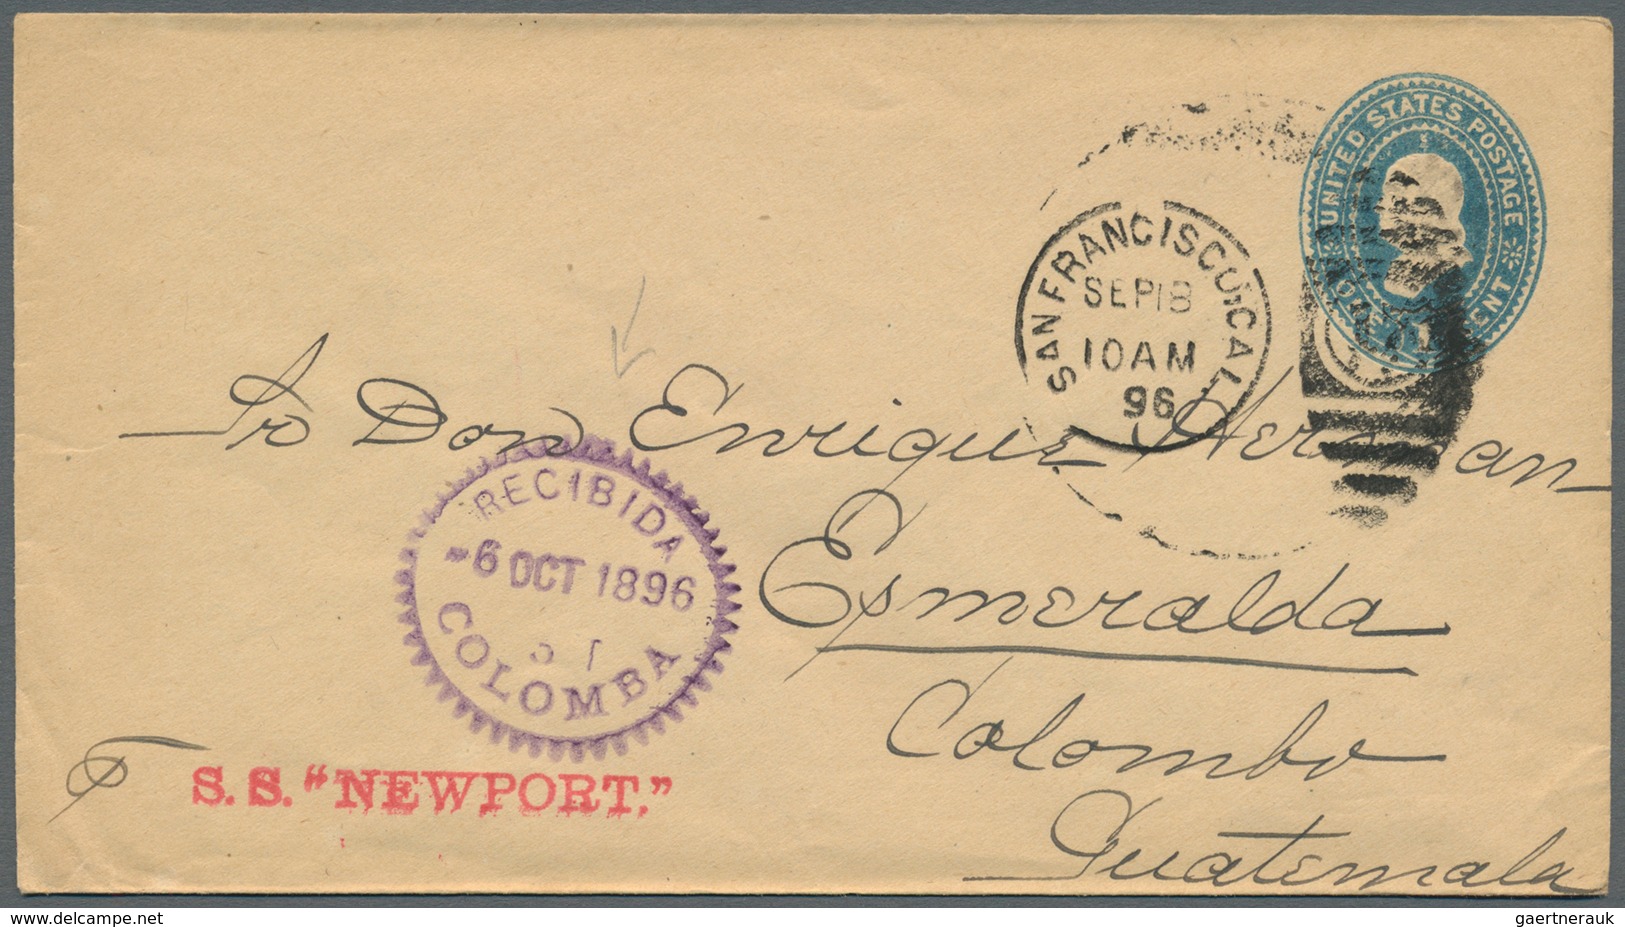 12033 Guatemala: XOLHUITZ 16 SET 1887 And COLOMBIA 6 OCT 1896, Two Violet "Recibida"-arrivals On Two Very - Guatemala